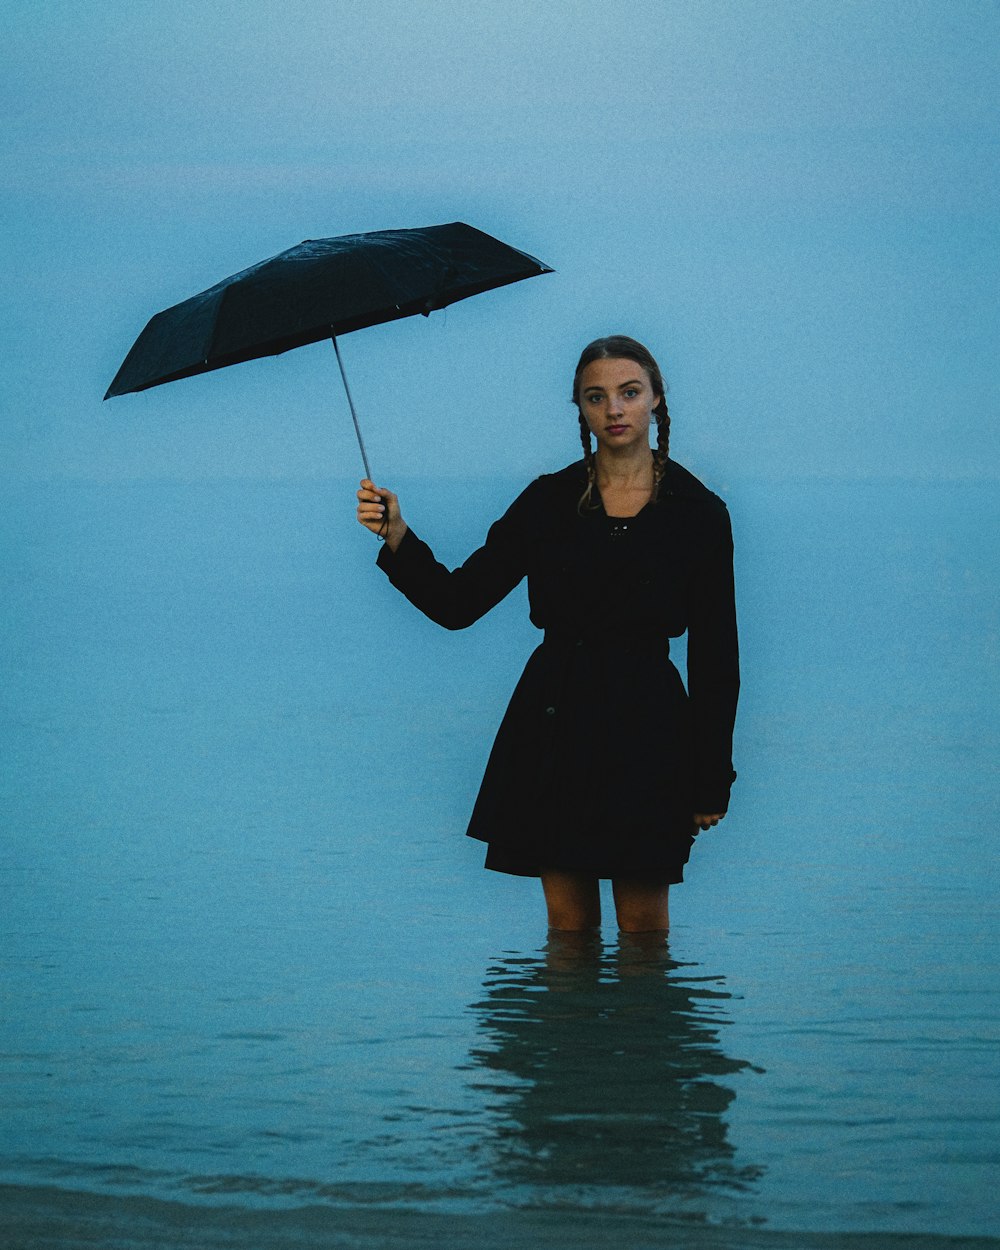 a woman standing in the water holding an umbrella